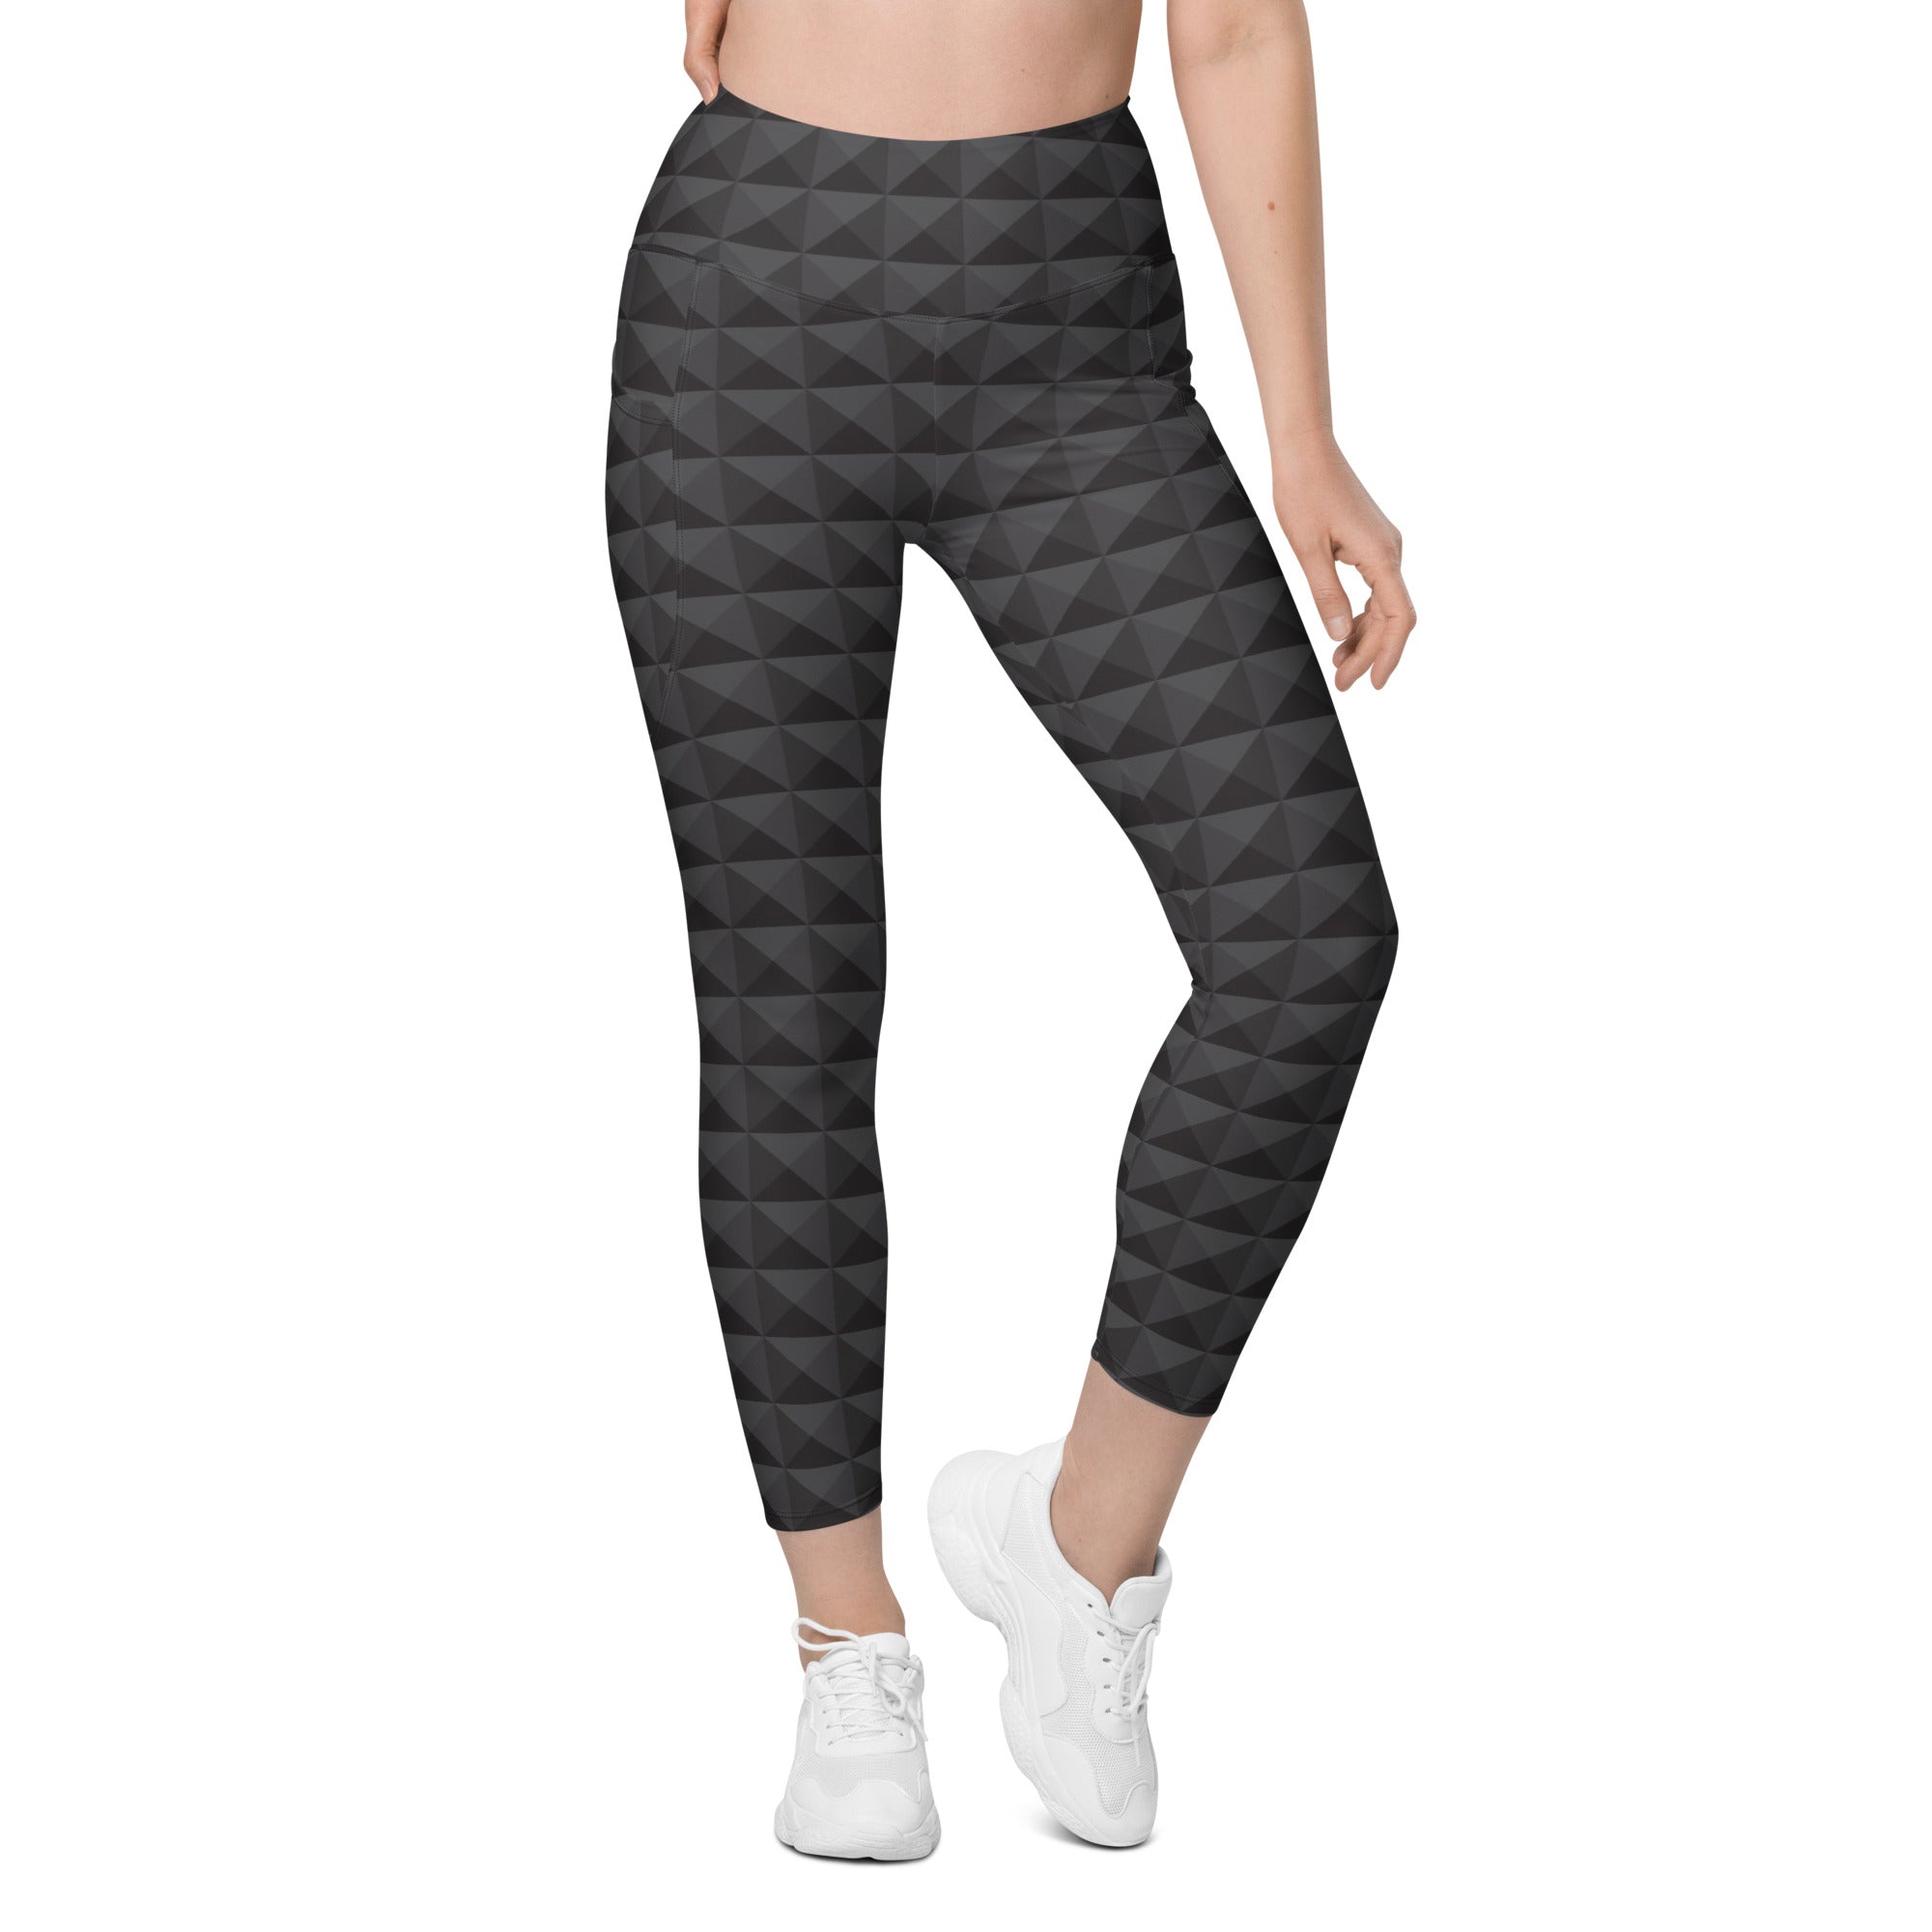 Seamless Cube Pattern Leggings With Pockets